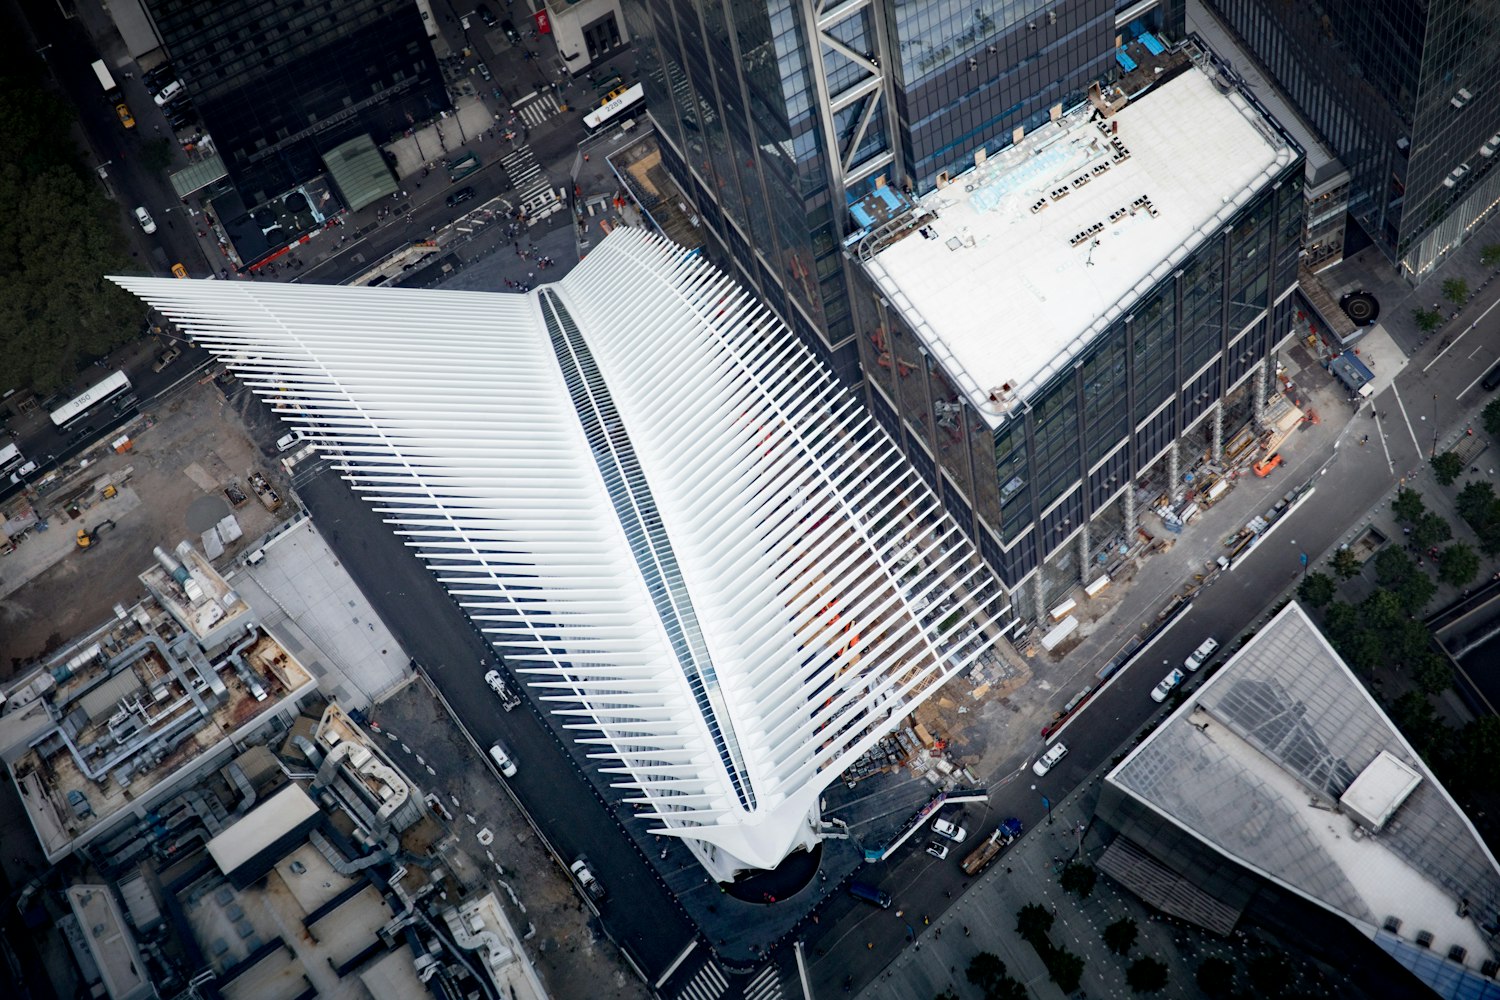 How to Visit the Oculus at the World Trade in NYC – 911 Ground Zero